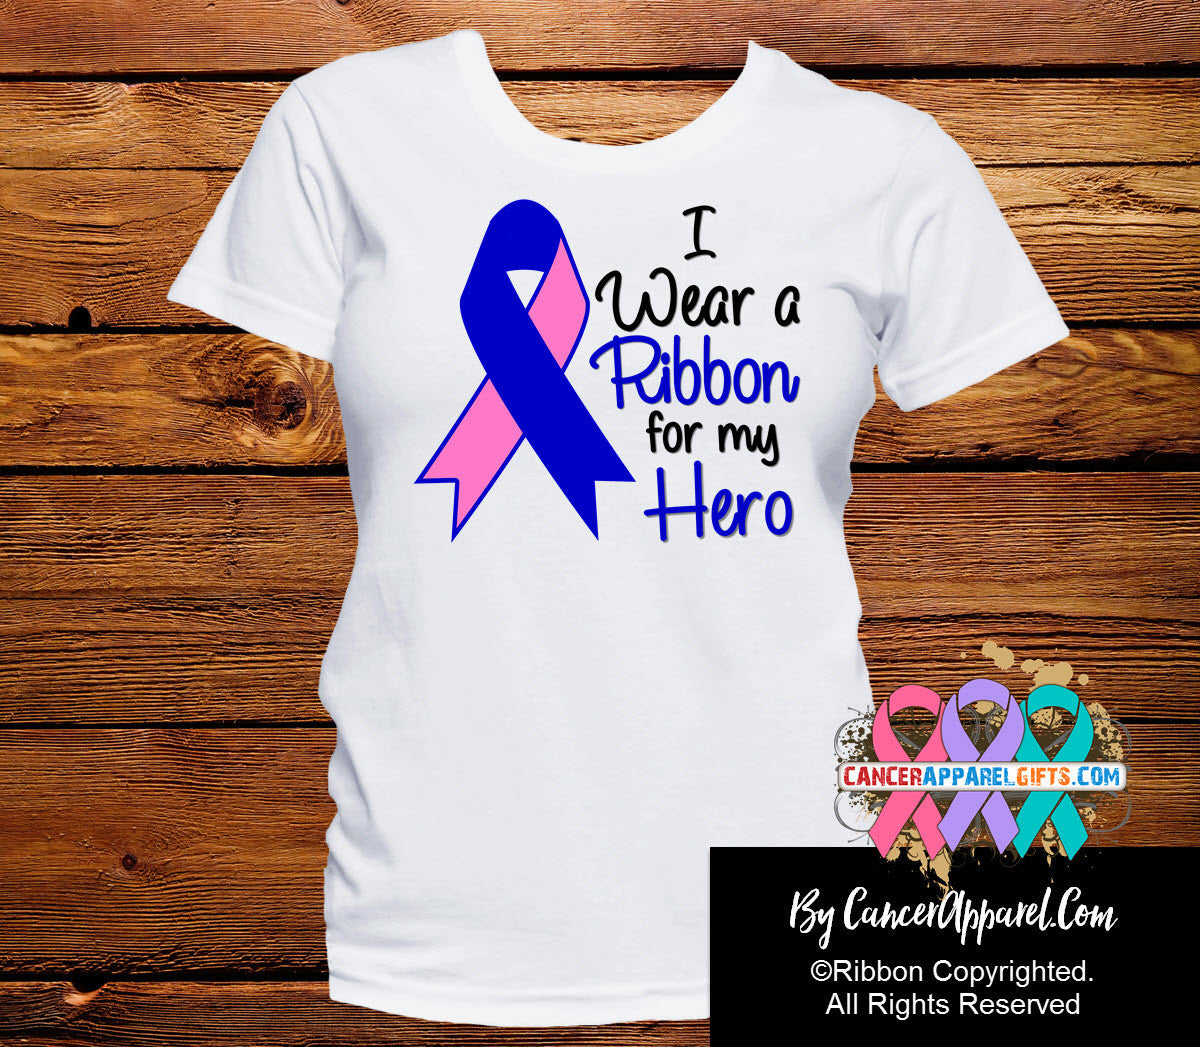 Male Breast Cancer For My Hero Shirts - Cancer Apparel and Gifts